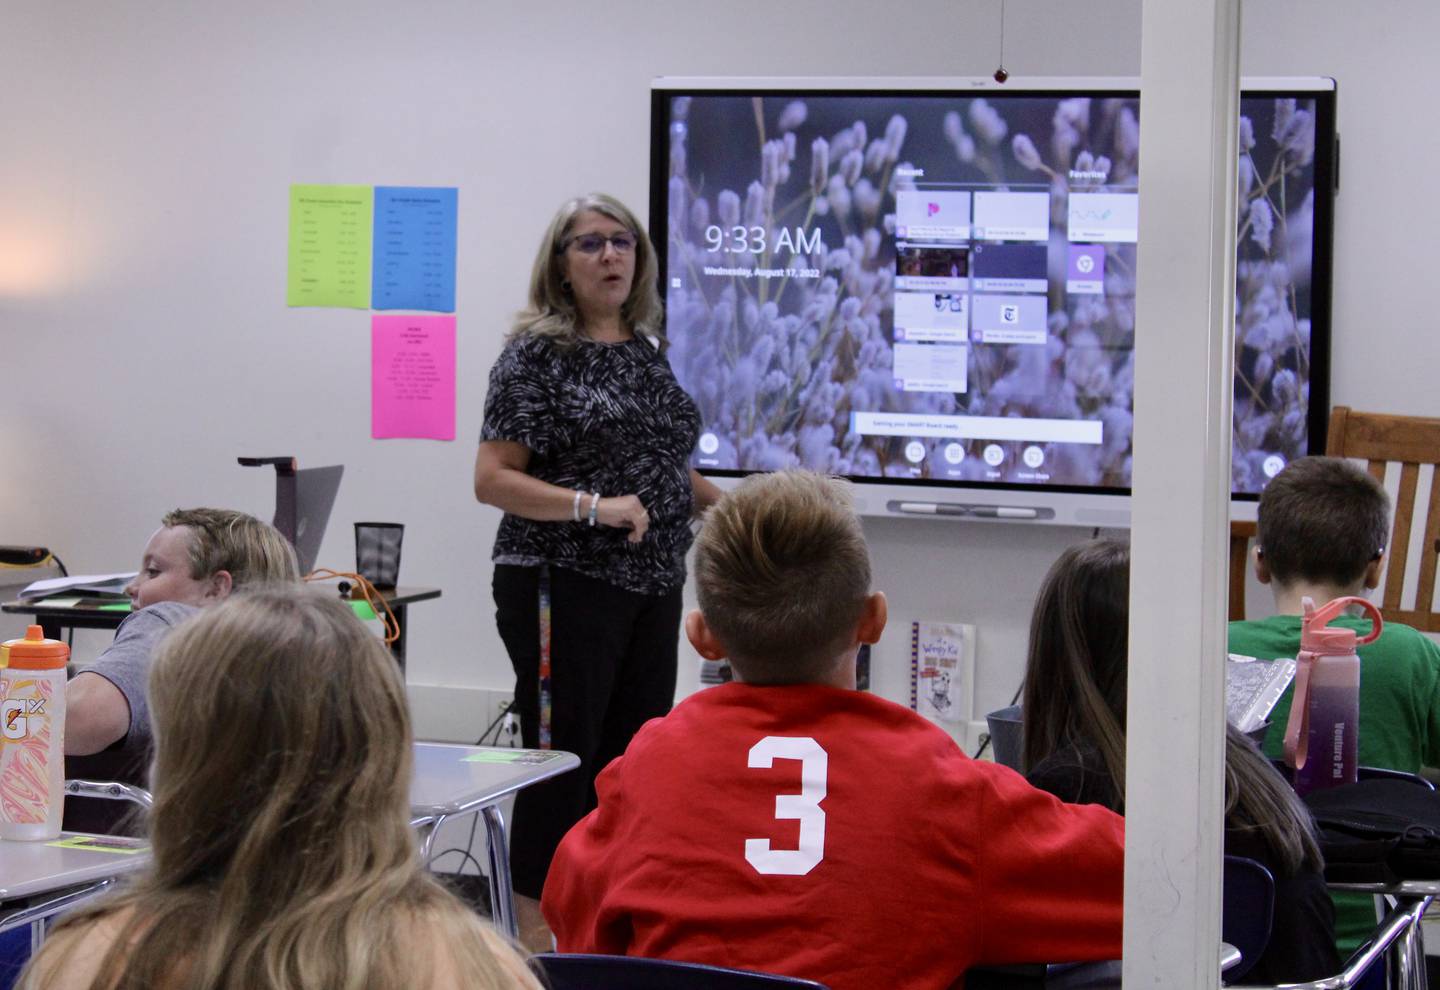 Janell Hartman, a sixth-grade teacher at West Carroll Middle School in Mount Carroll, boots up her classroom video board to go over class schedules with her students on the first day of school on Wednesday.